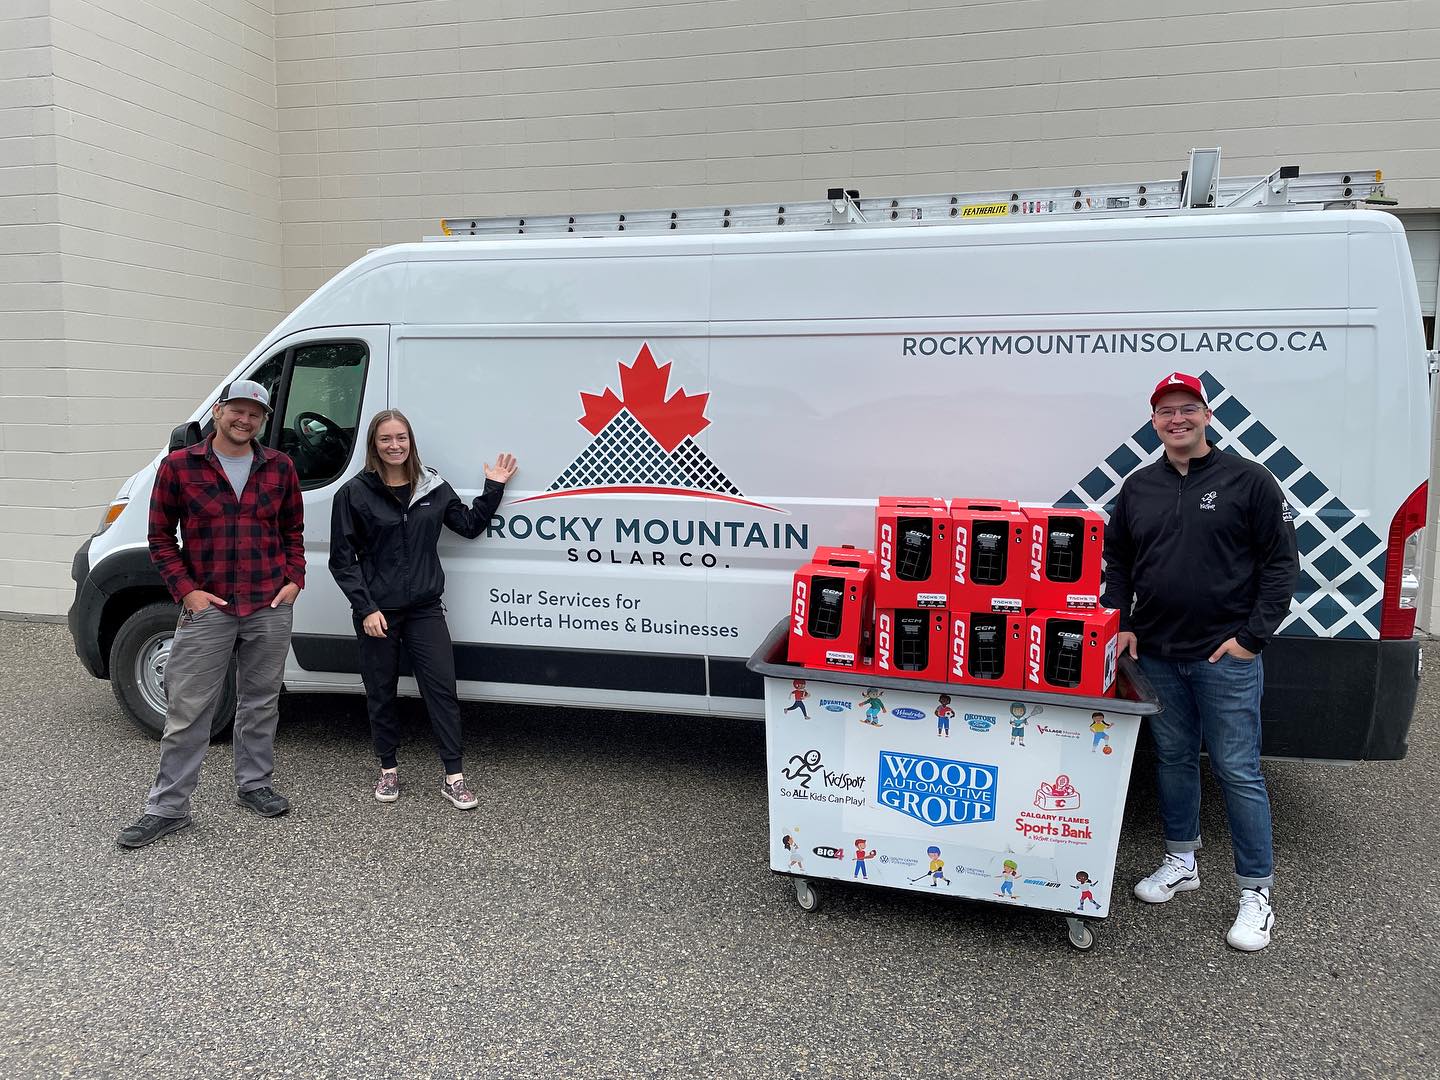 Three people stand smiling beside a white van with "ROCKY MOUNTAIN SOLAR CO." branding, and a cart loaded with red portable generators.